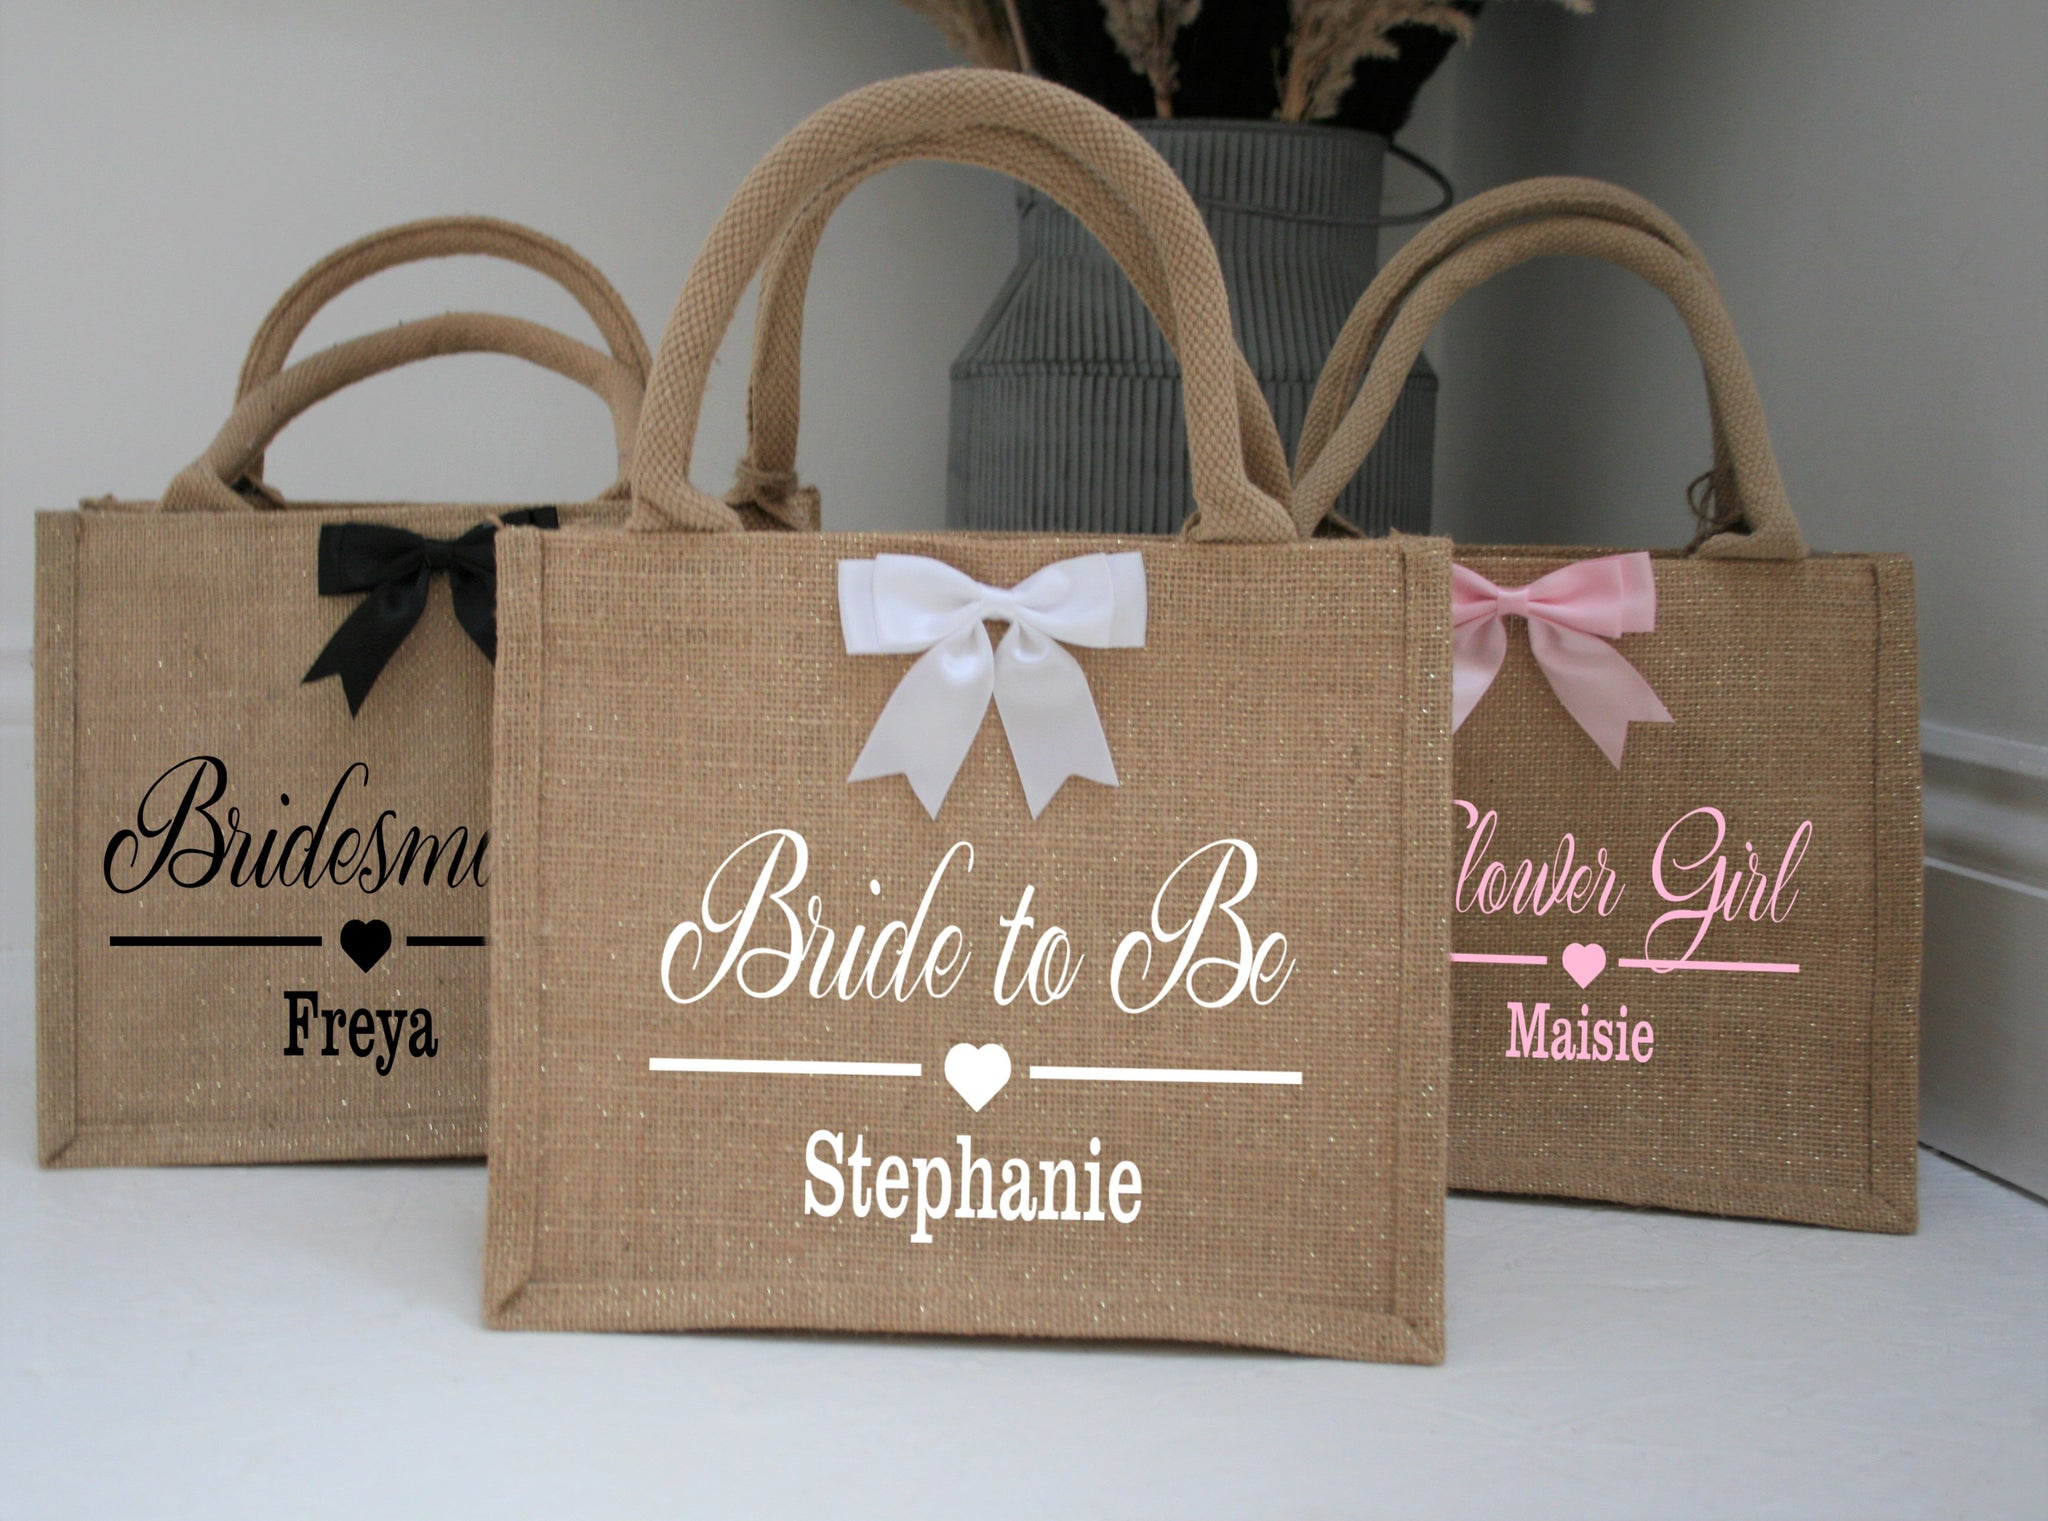 Jute Bags For Wedding Gifts Factory Sale - www.edoc.com.vn 1694678220